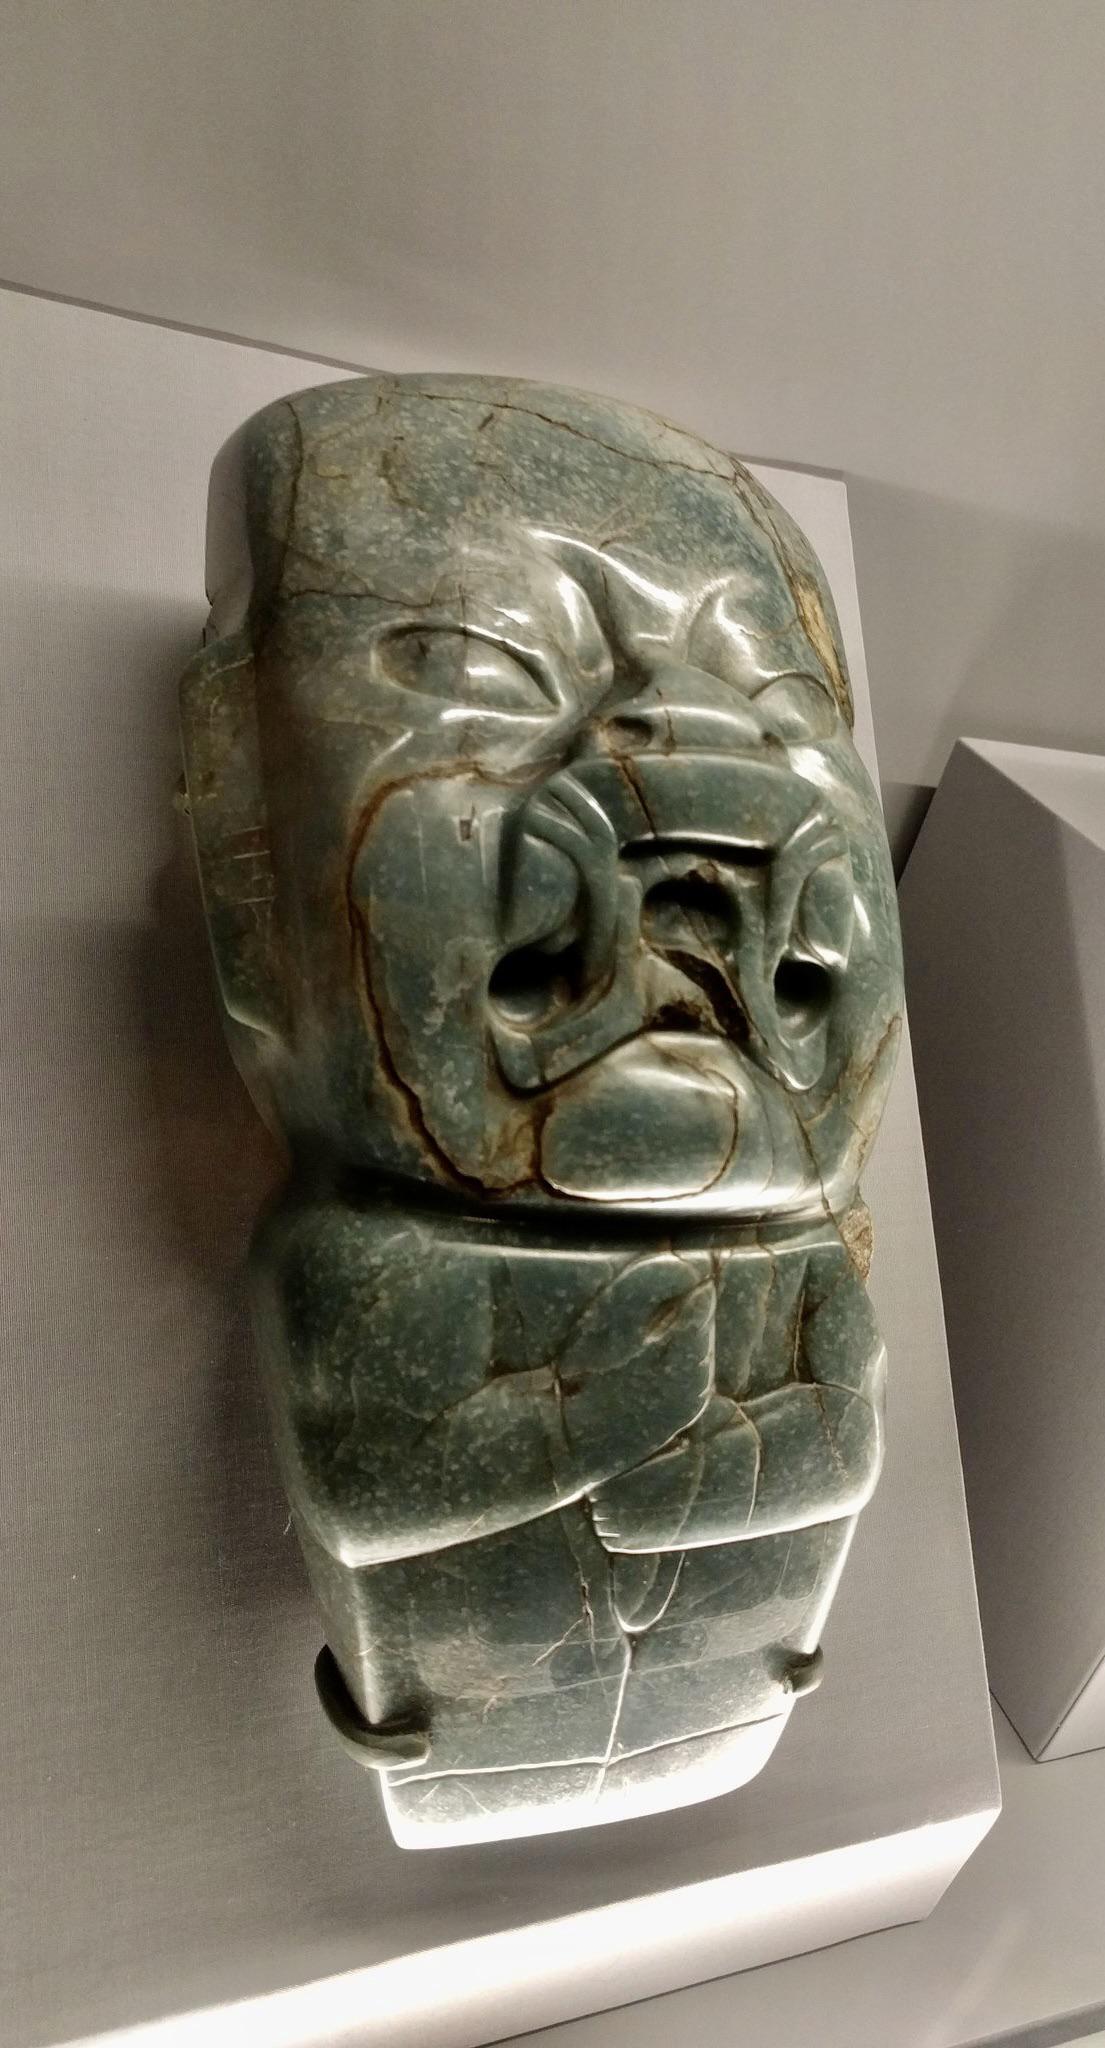 The Kunz Axe, likely only used ceremonially or was deposited in a grave. Crafted in a typical Olmec style from jadeite, the axe was found in the state of Oaxaca in Mexico. 1200-400 BCE.jpg